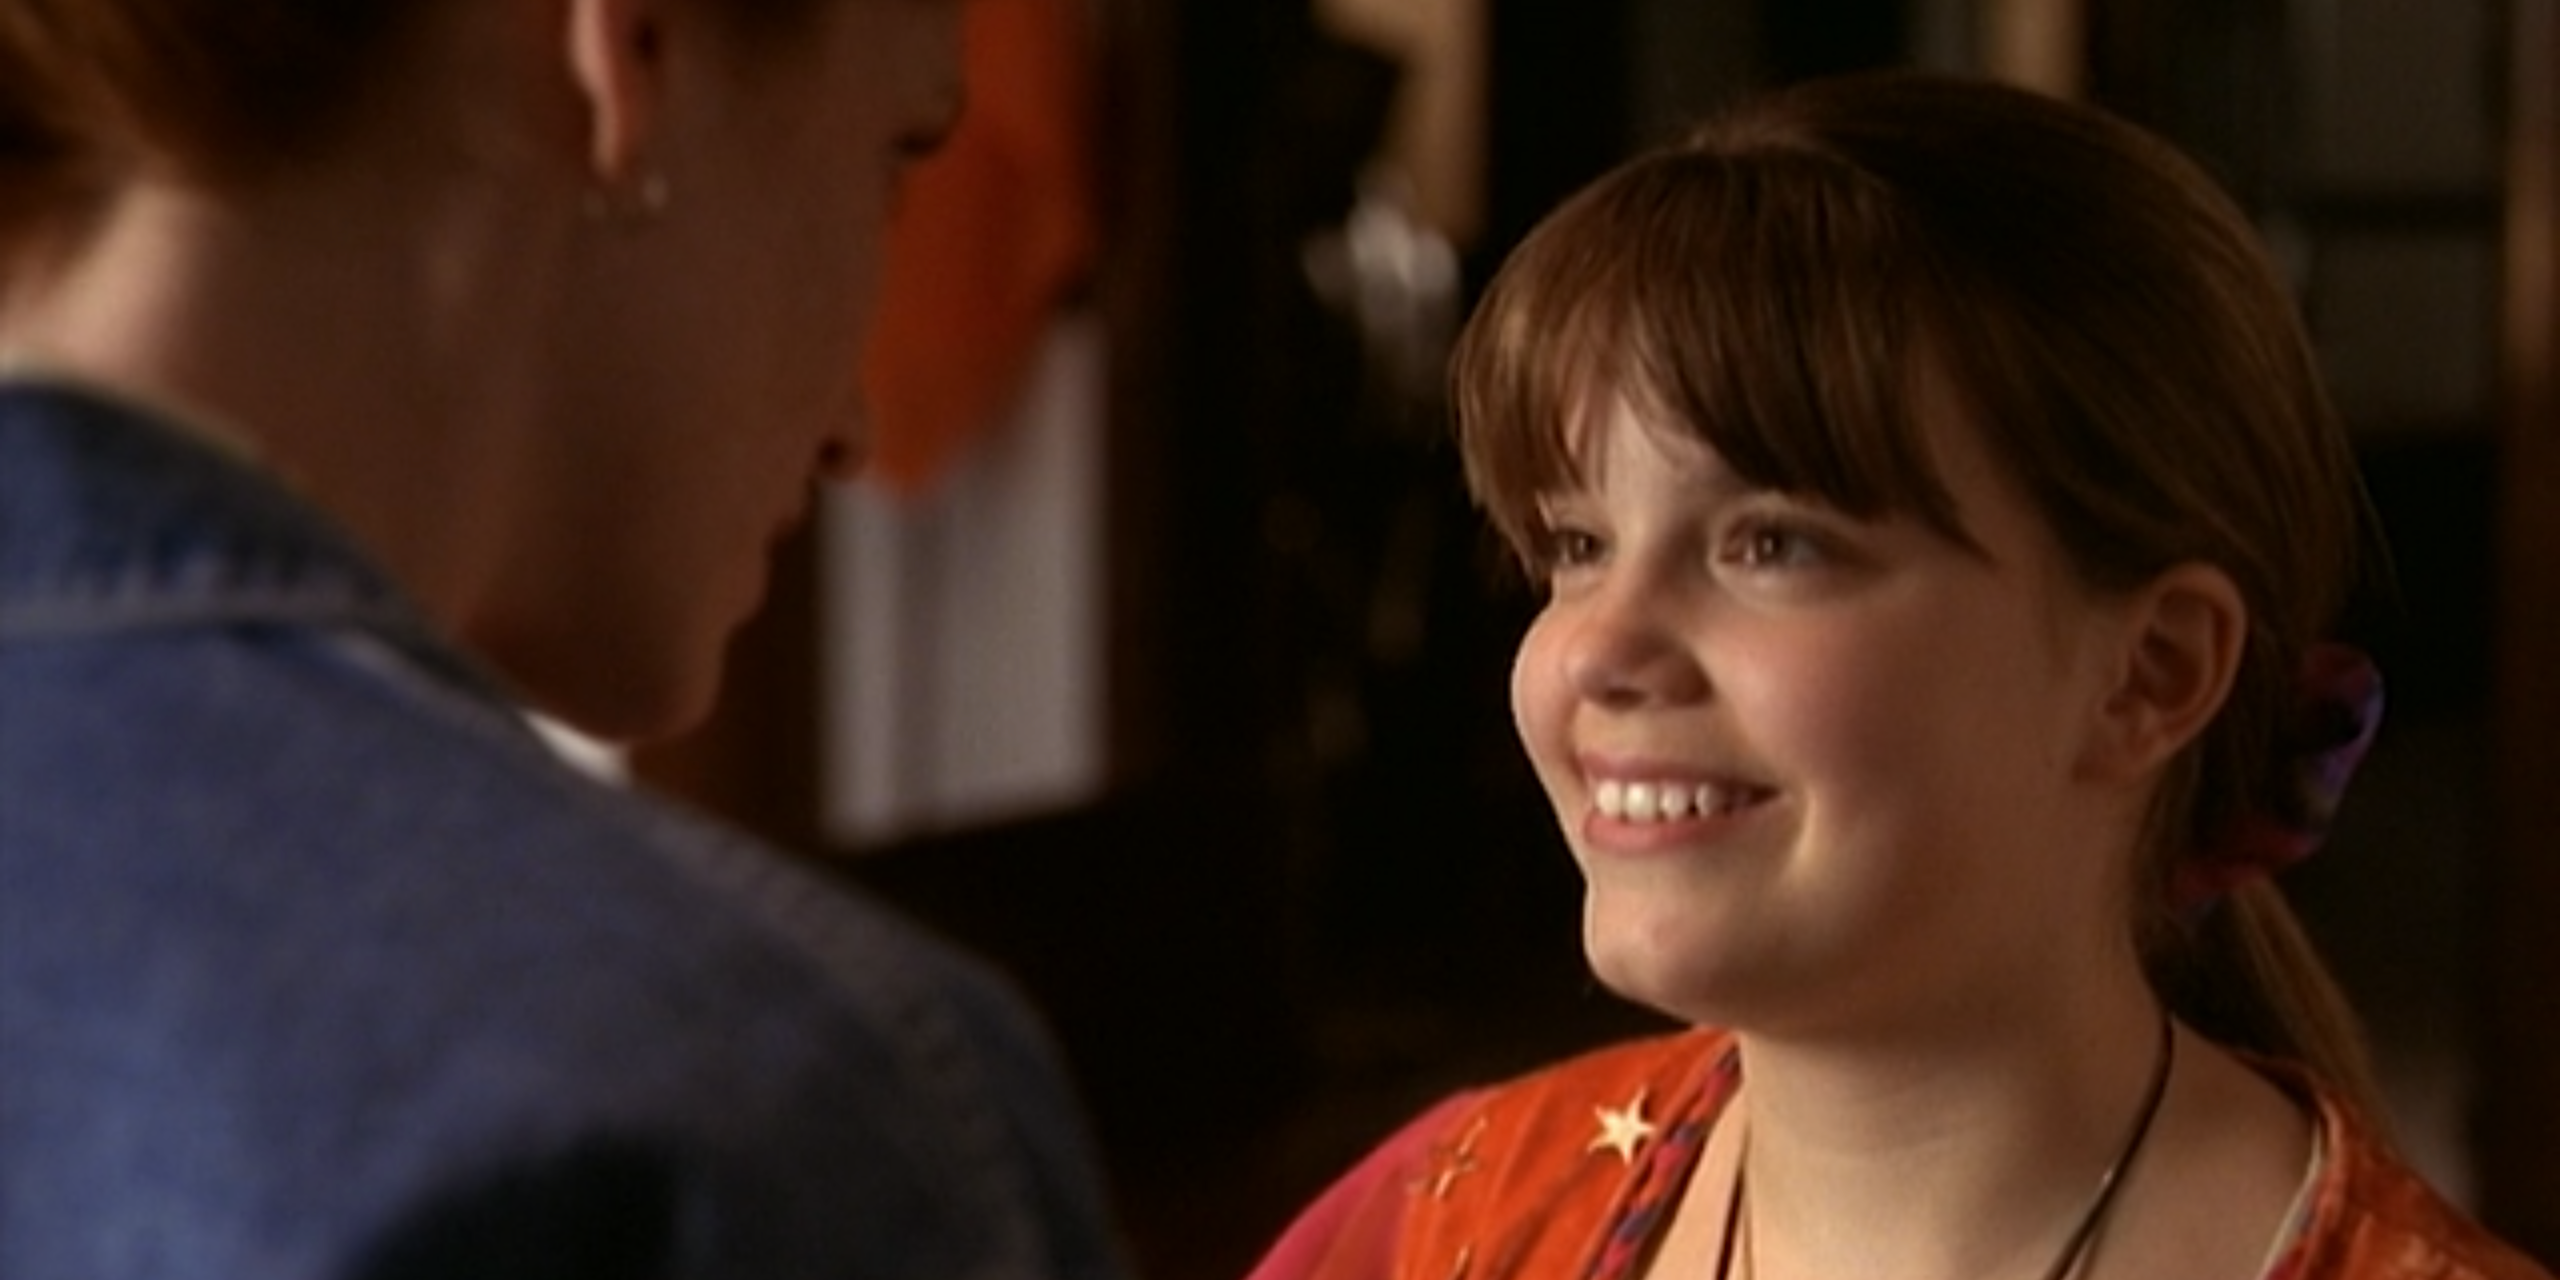 Marnie talking to her mom in Halloweentown